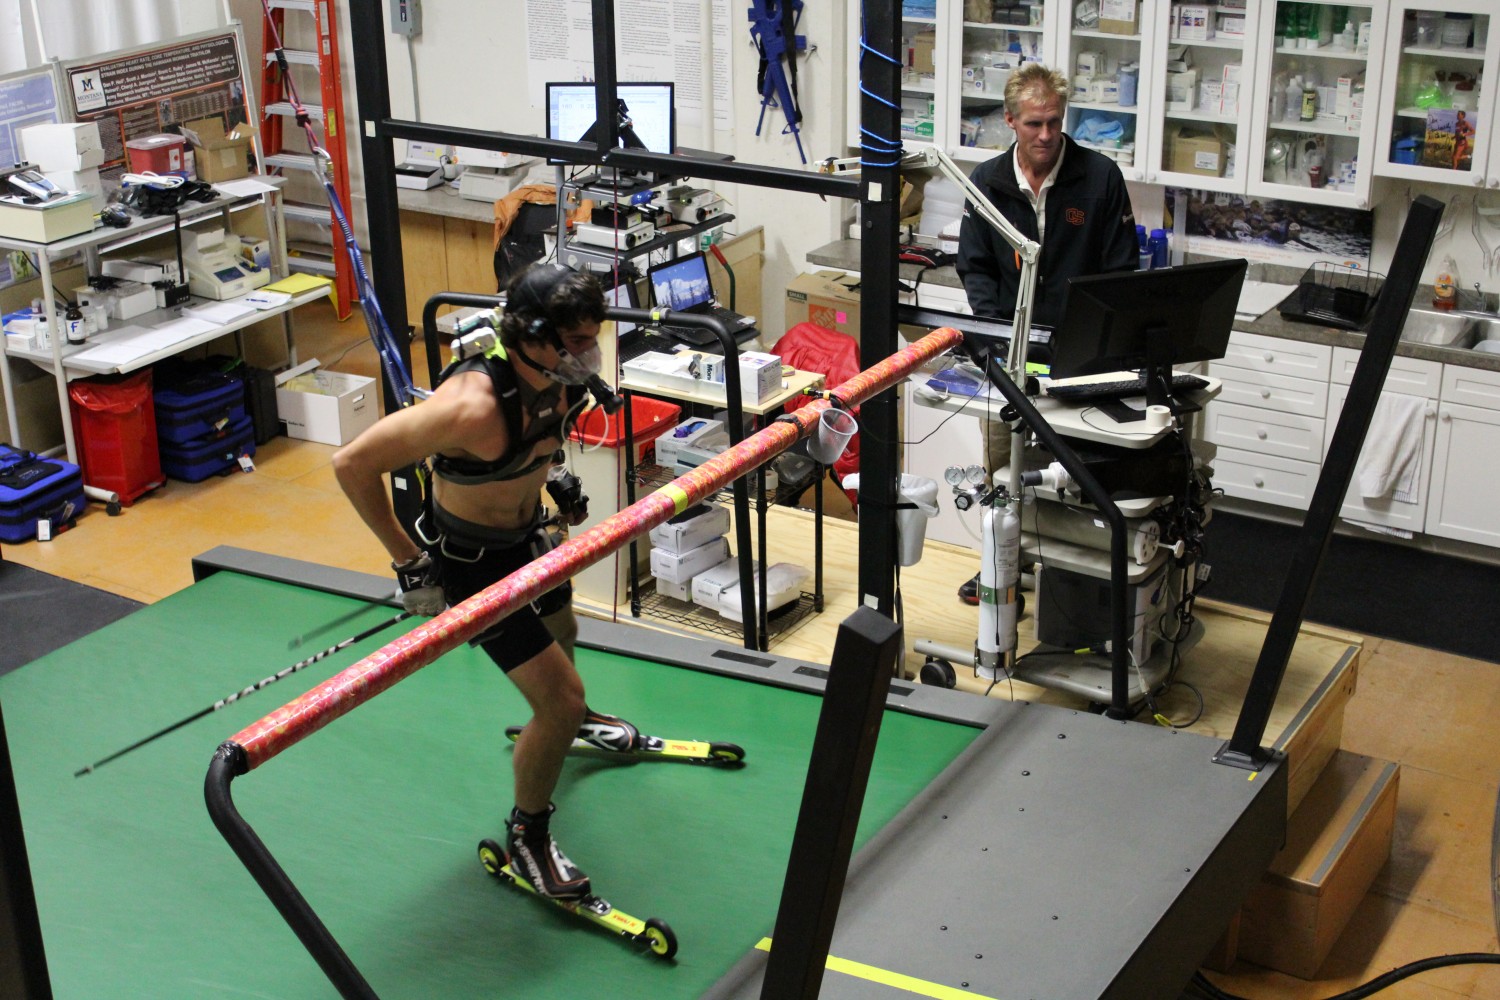 Best of Both Worlds: MSU Measures VO2max and Upper Body at the Same Time (with Video)